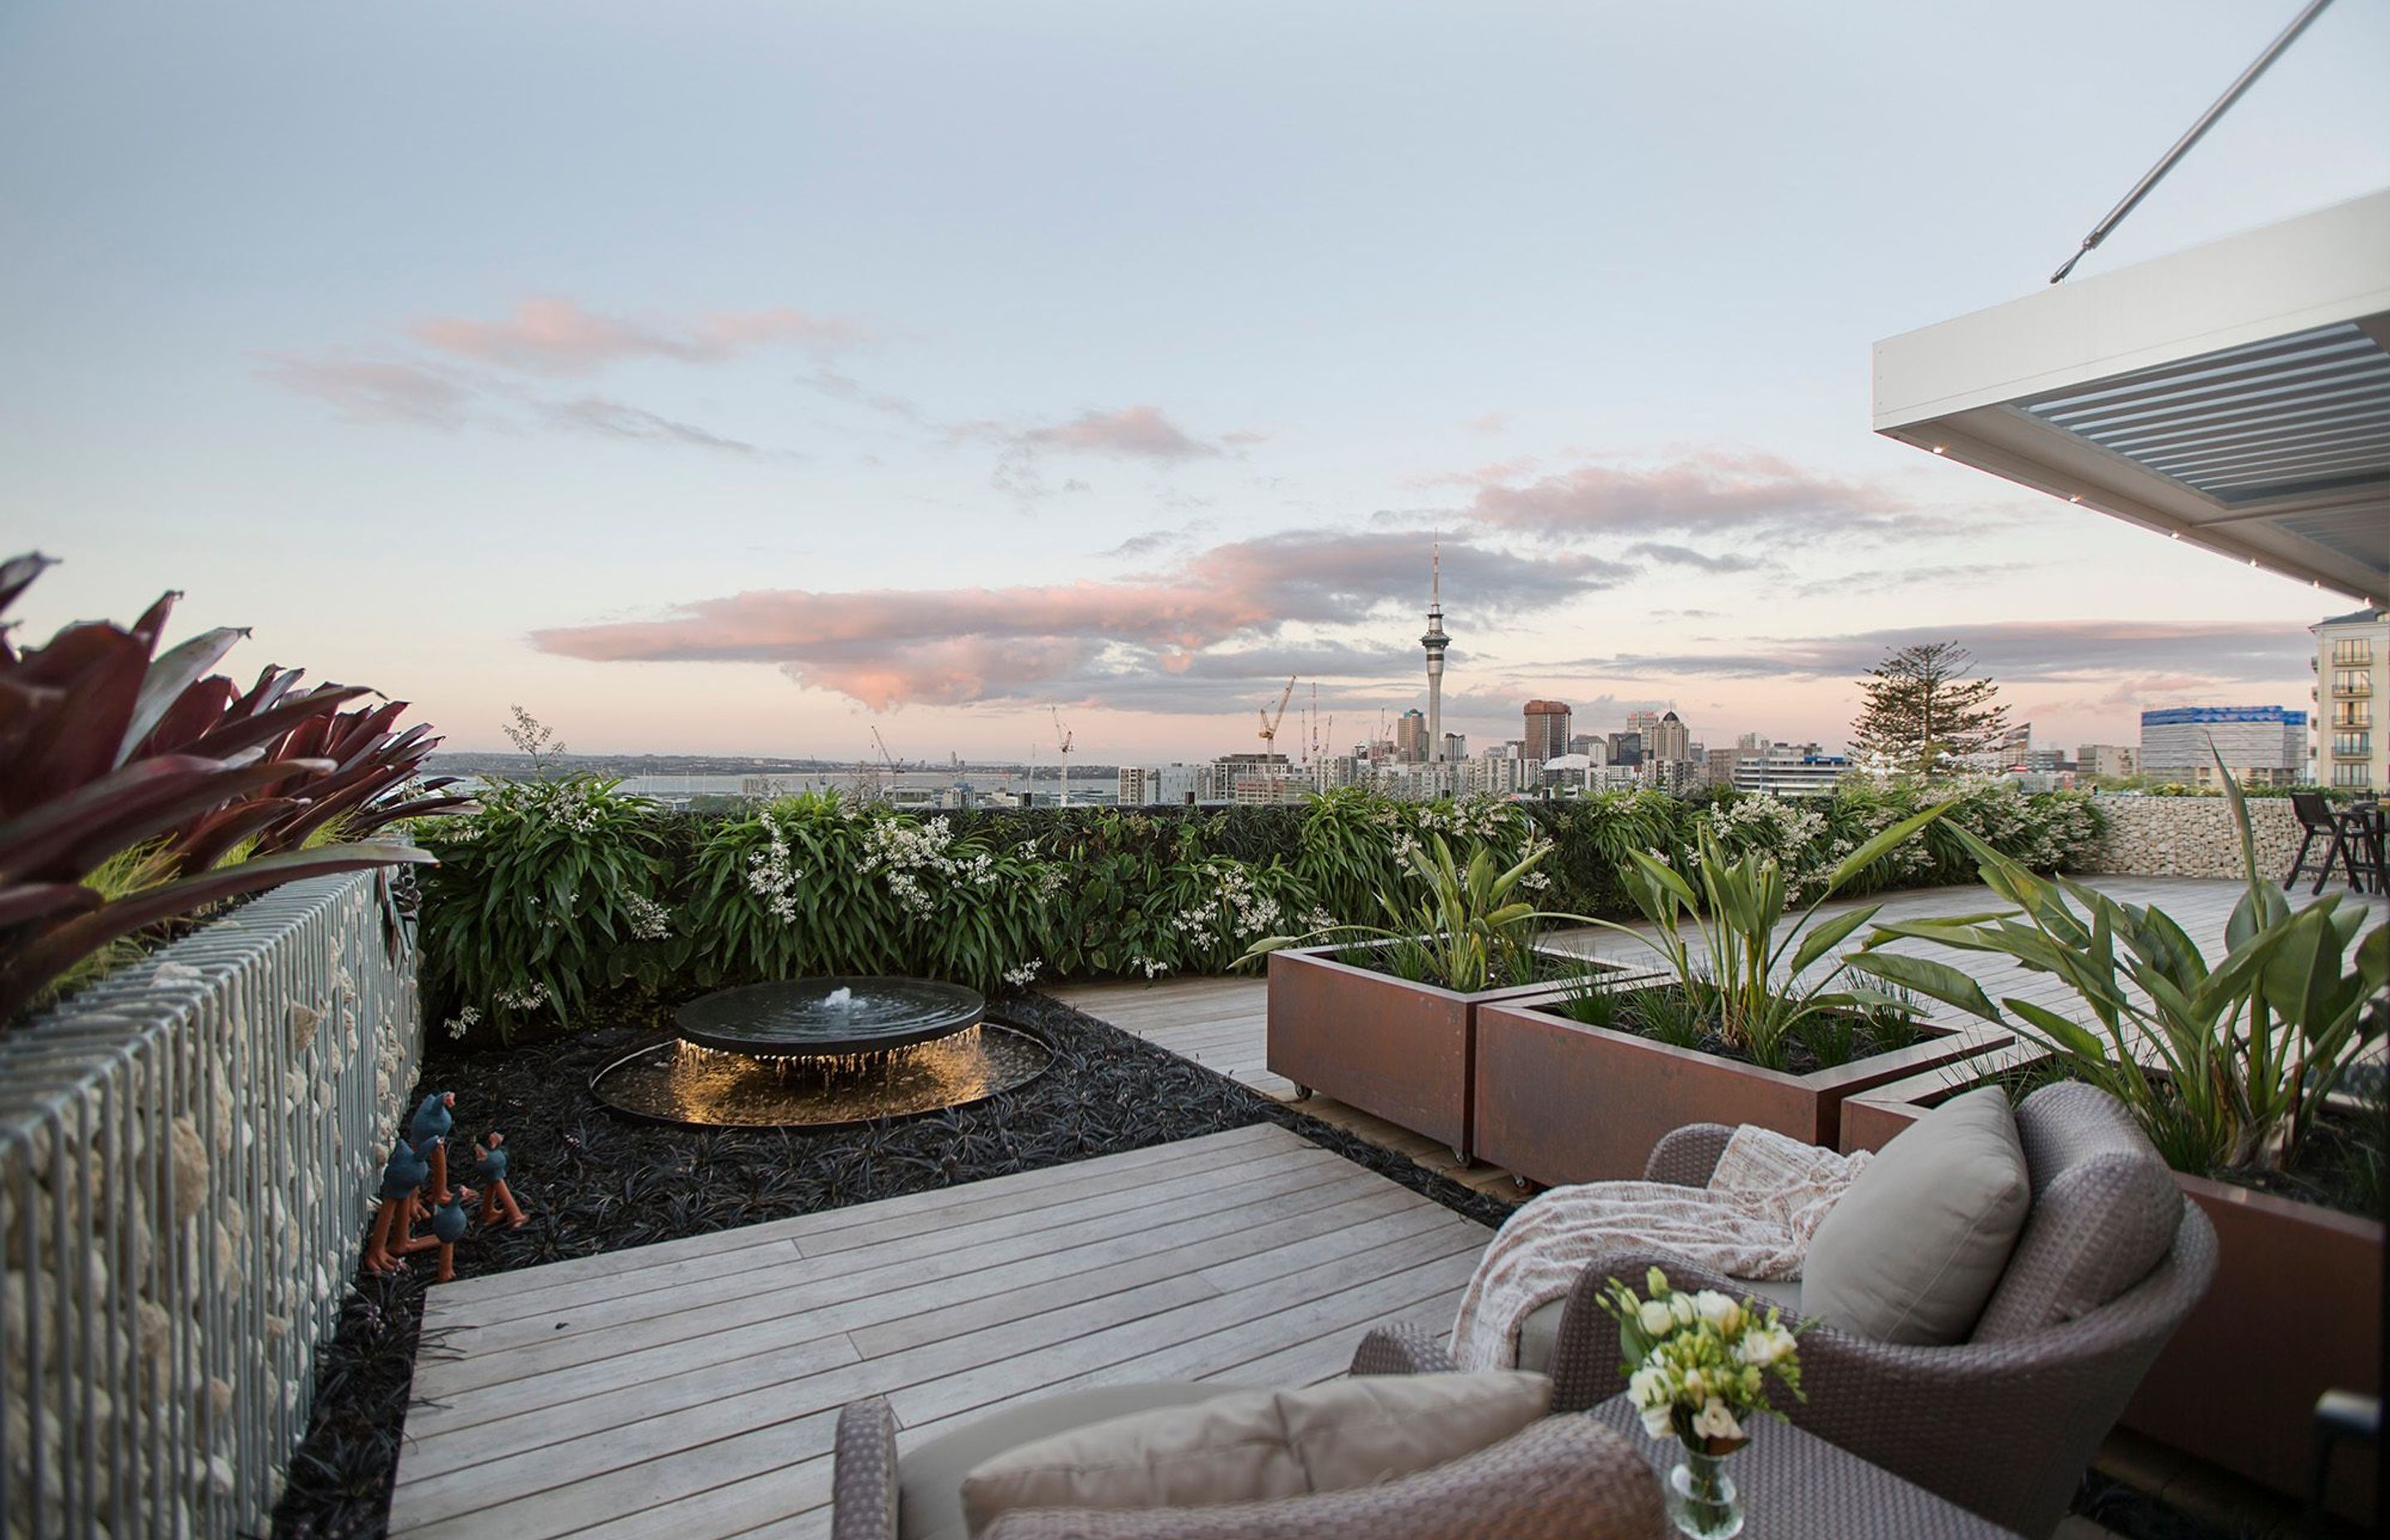 Natural Habitats designed and built a revolutionary rooftop landscape for this private Auckland apartment, which features city and harbour views and a beautiful green entertaining space that comfortably hosts up to 30 guests.